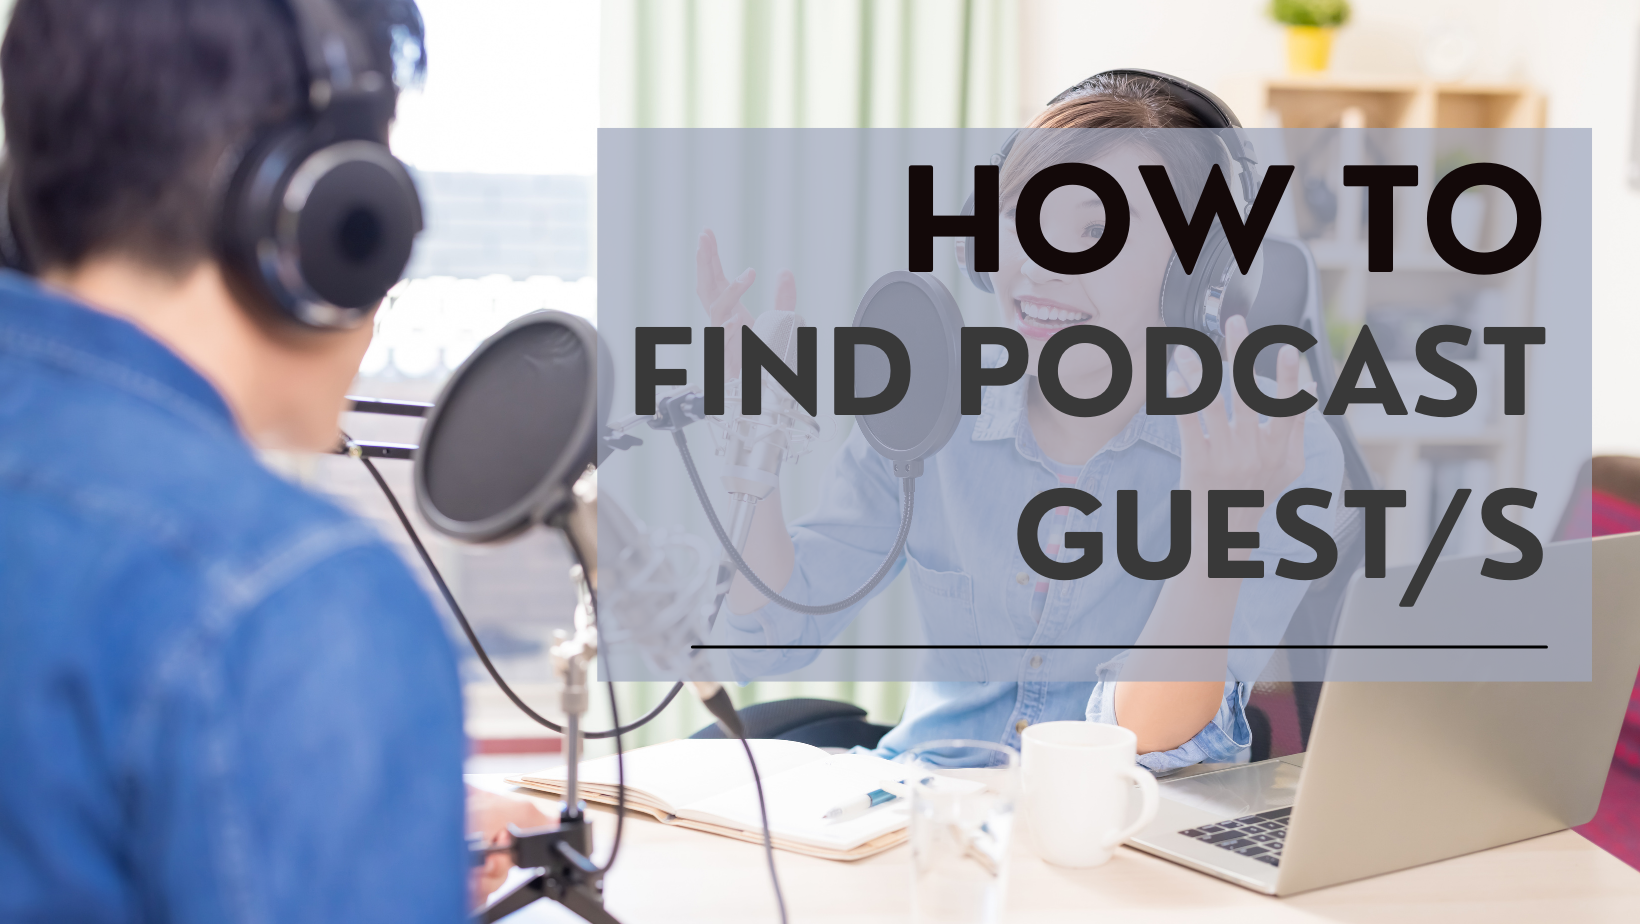 How To Find Podcast Guest/s For Your Show